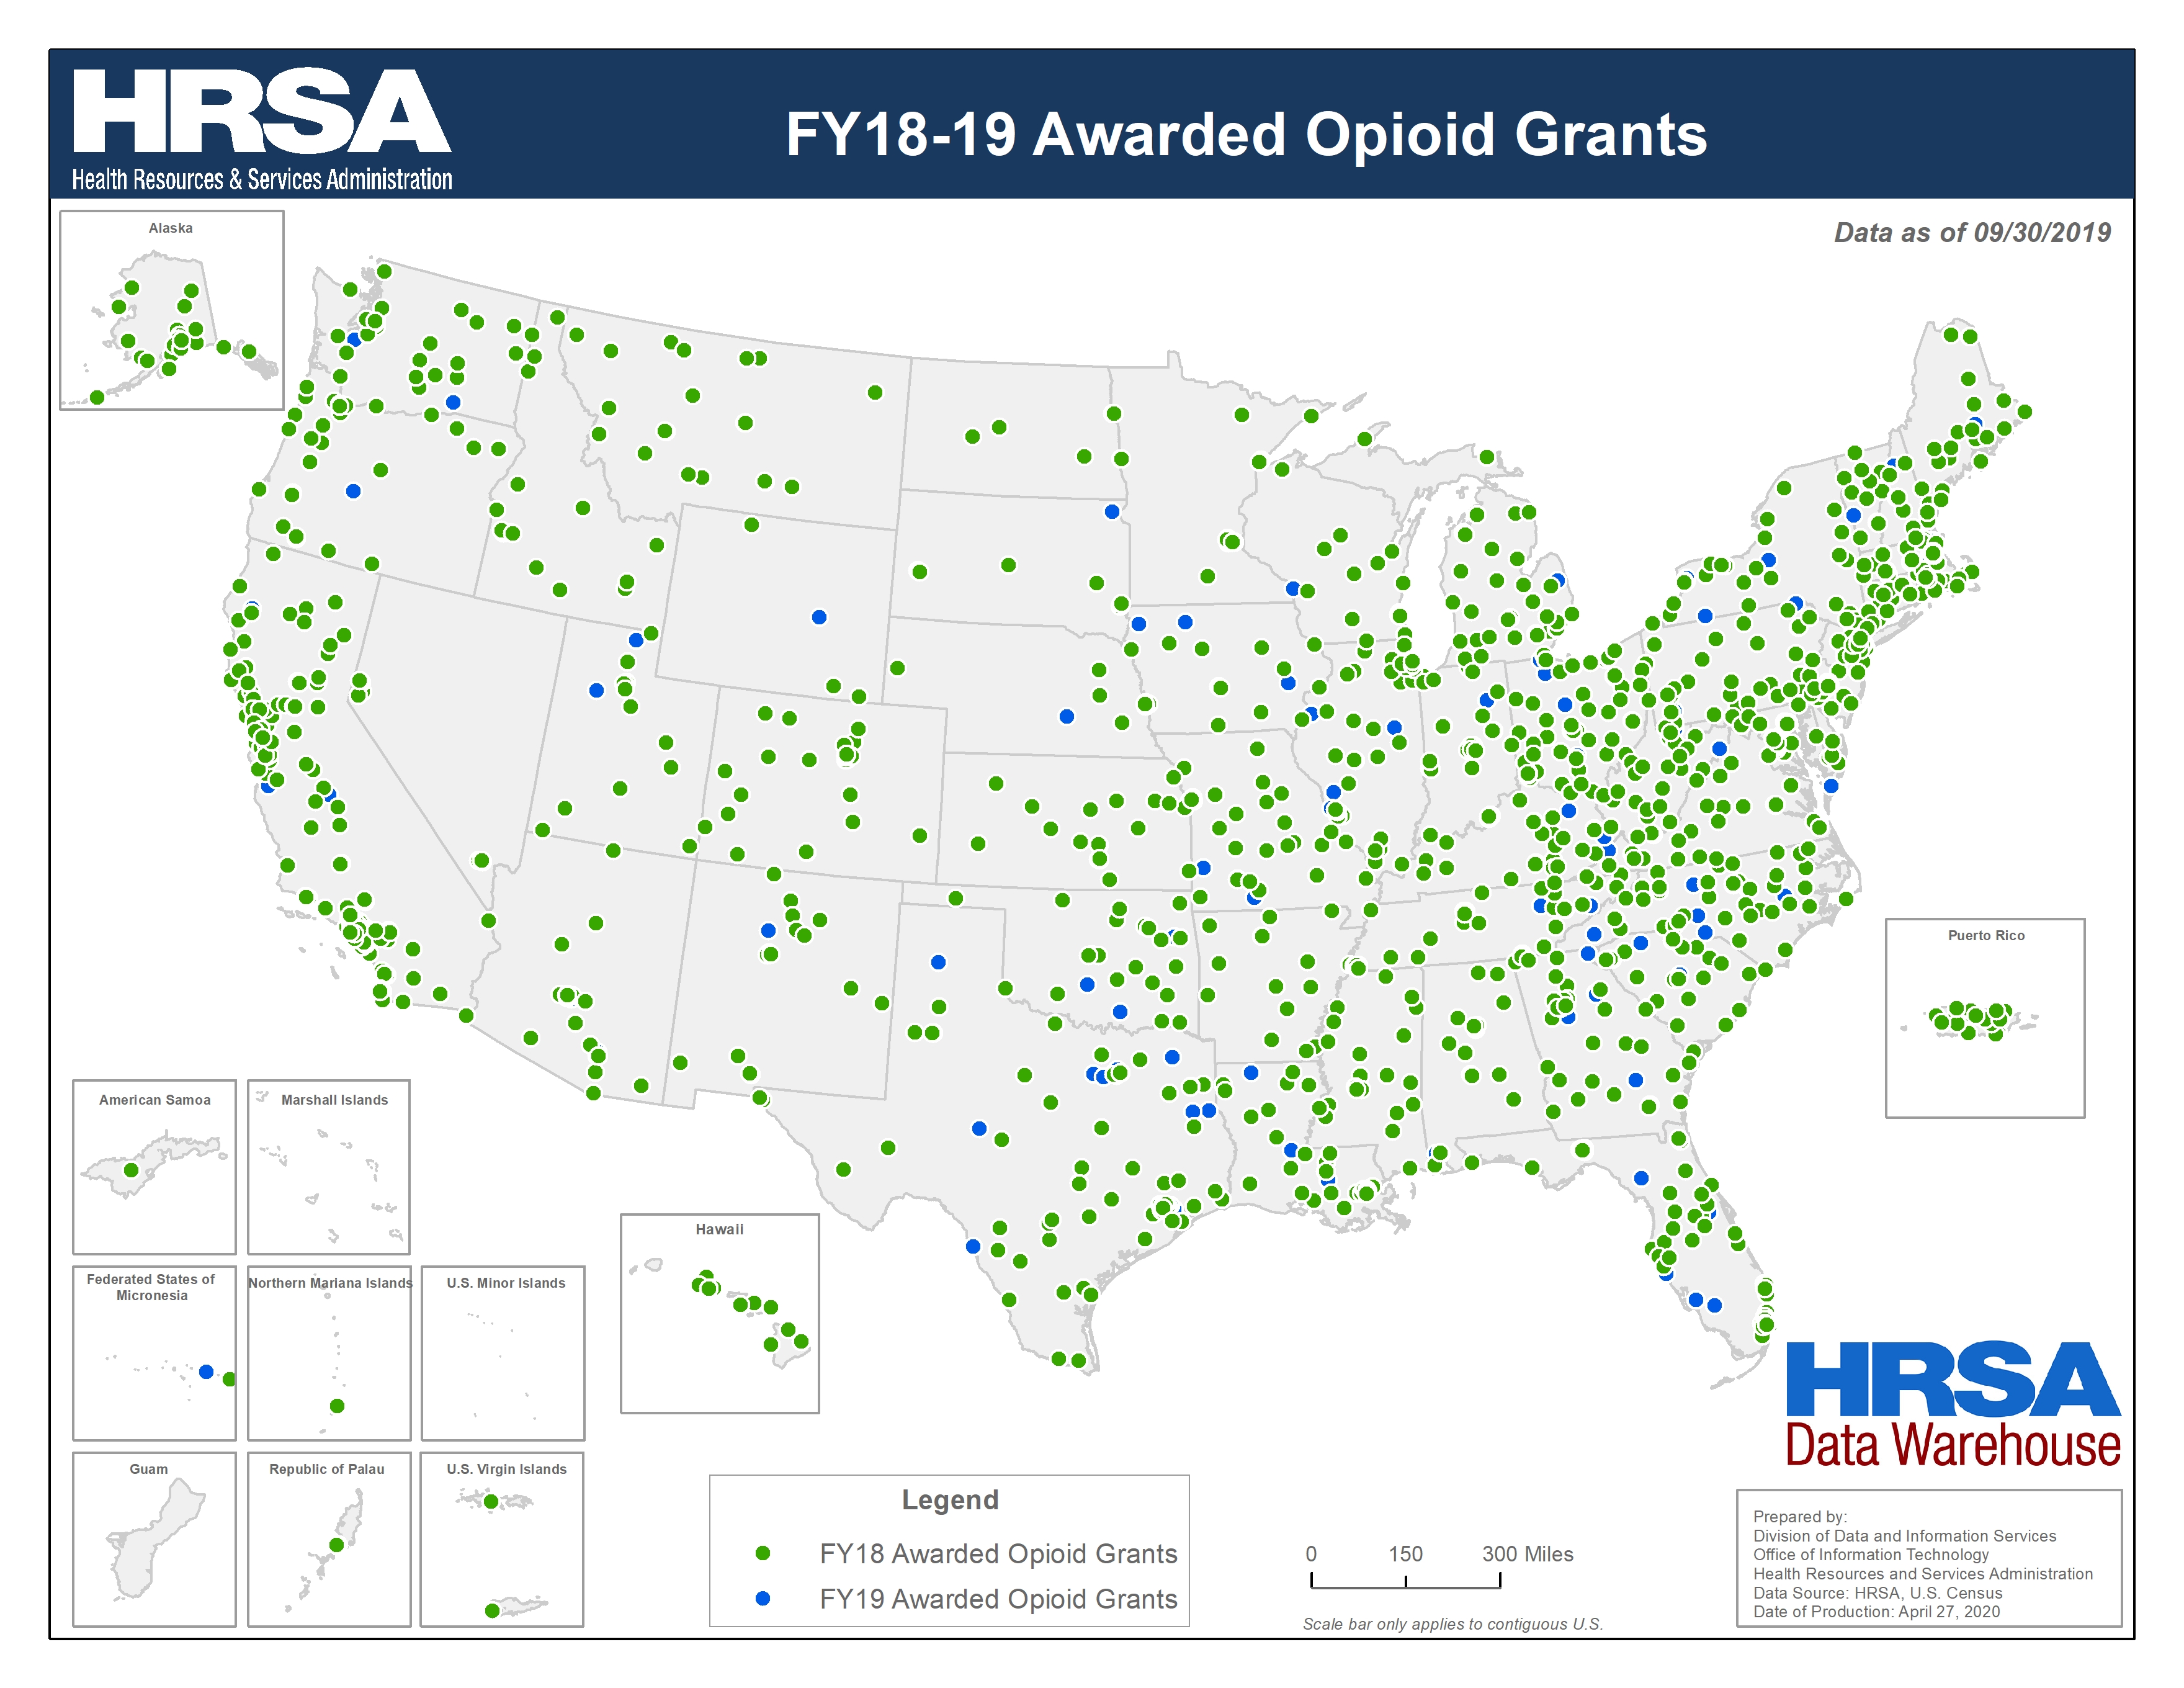 Preview Map of FY18-19 Awarded Opioid Grants